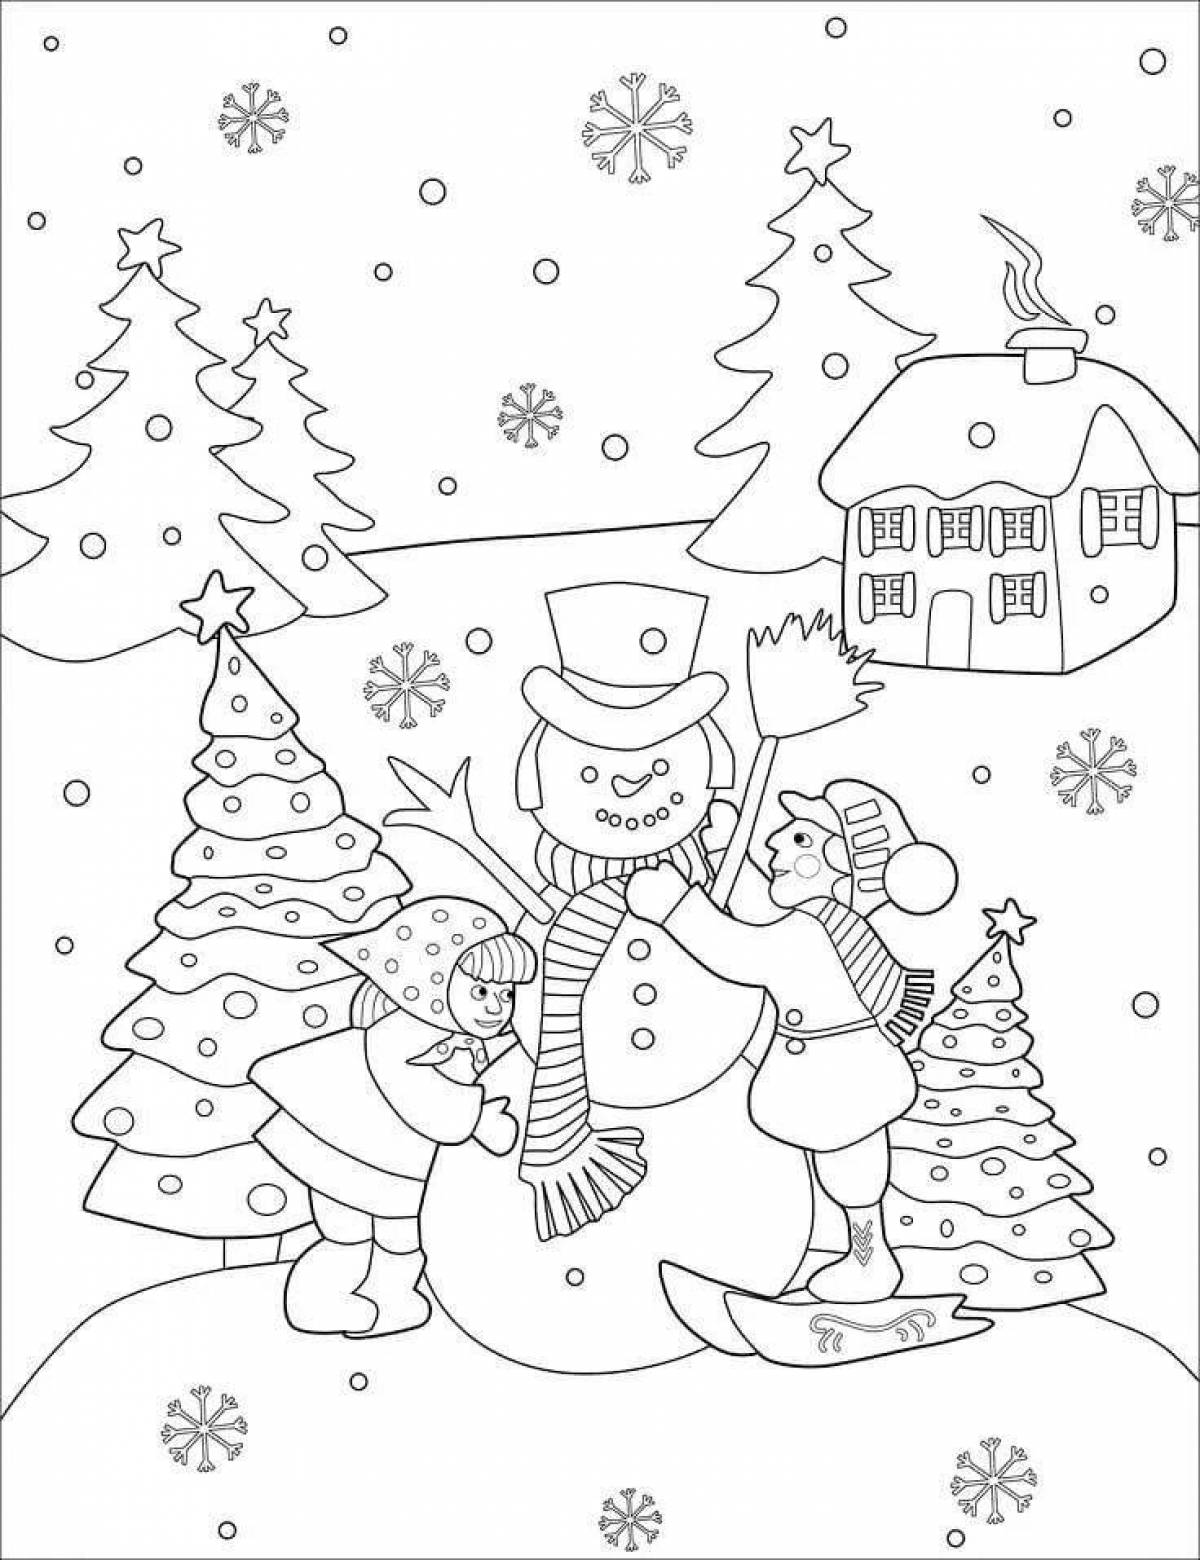 Animated snowman coloring page